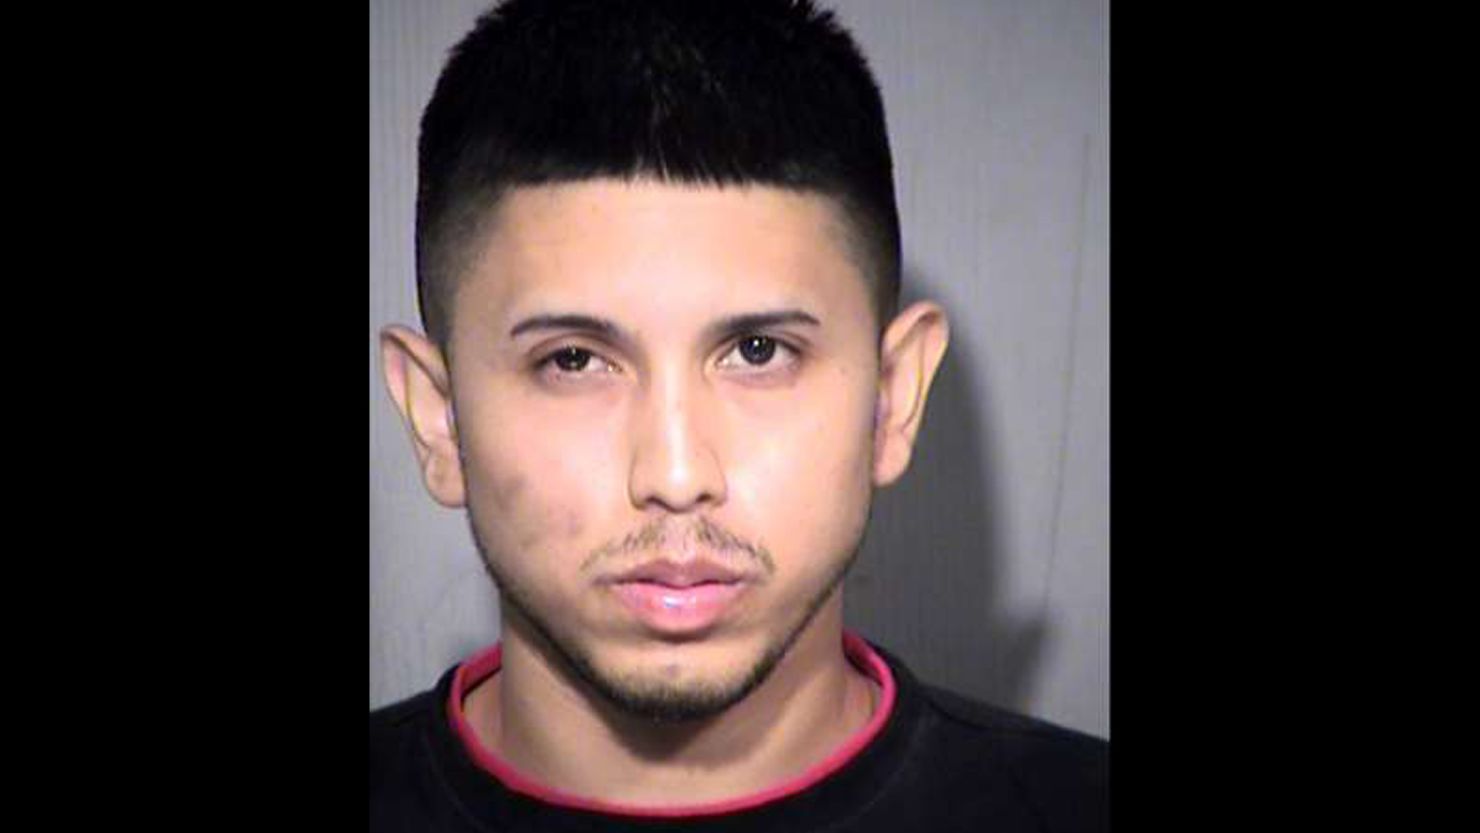 Aaron Saucedo has been charged with a series of murders that led many to dub the culprit "the serial street shooter"